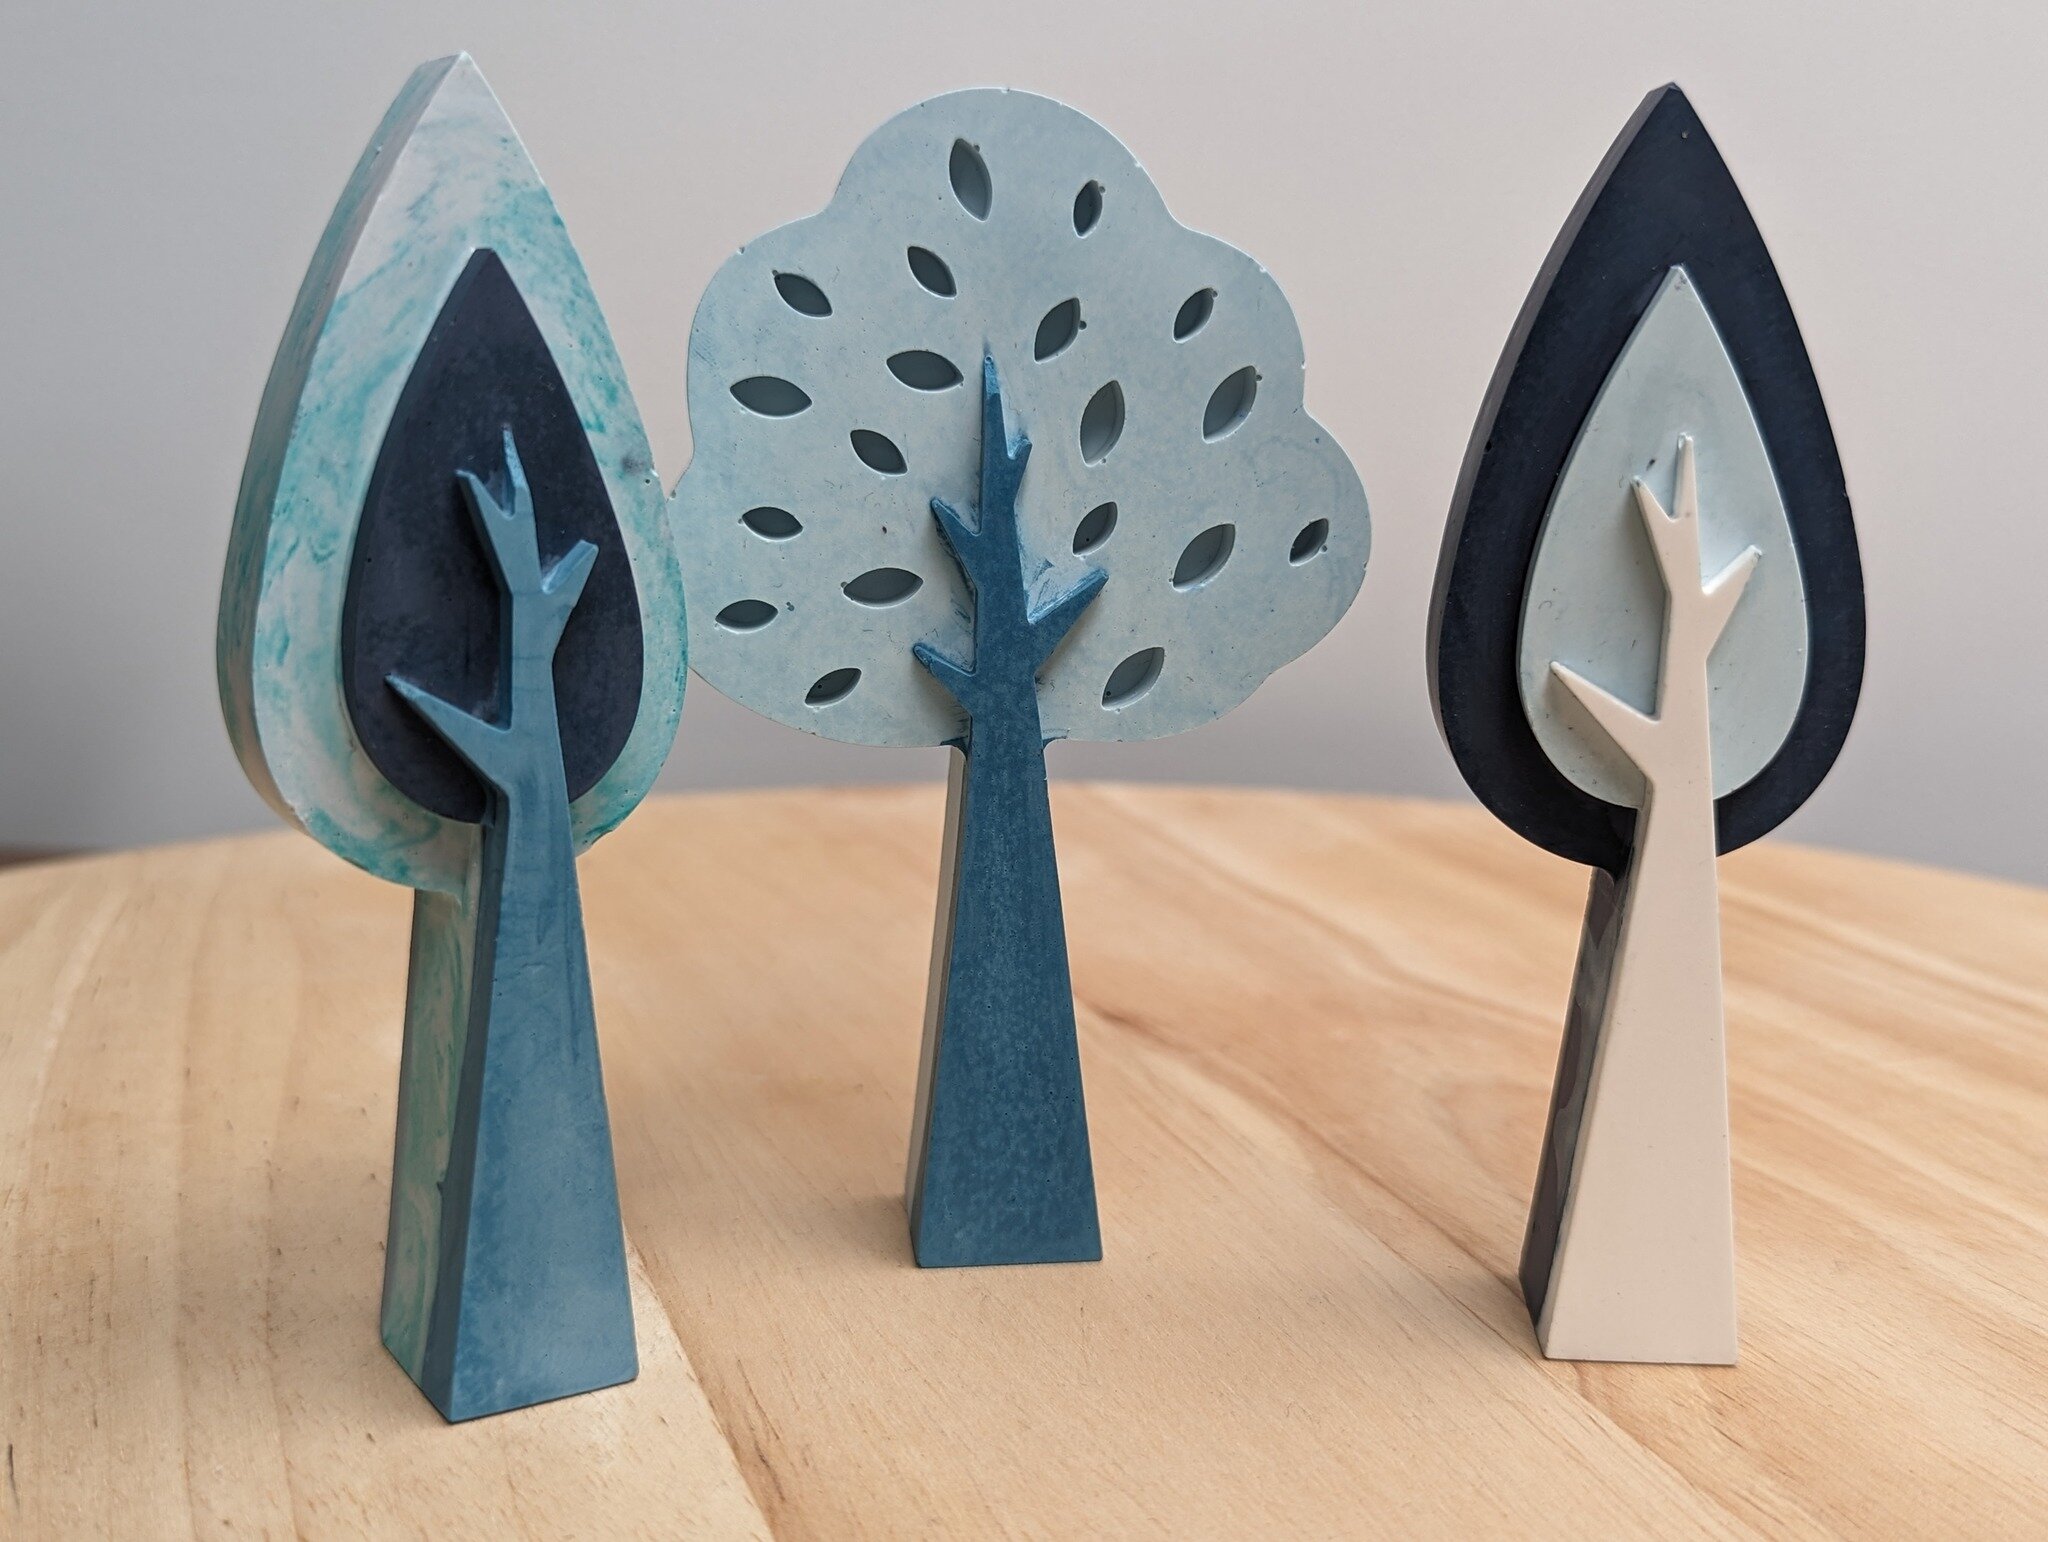 These delightful decorative trees are made from eco-resin and are the perfect playful splash of color for your office, home, or as a gift.  They look great in a group.

Each tree is hand-made and coloured&hellip;. no two trees are exactly the same.

